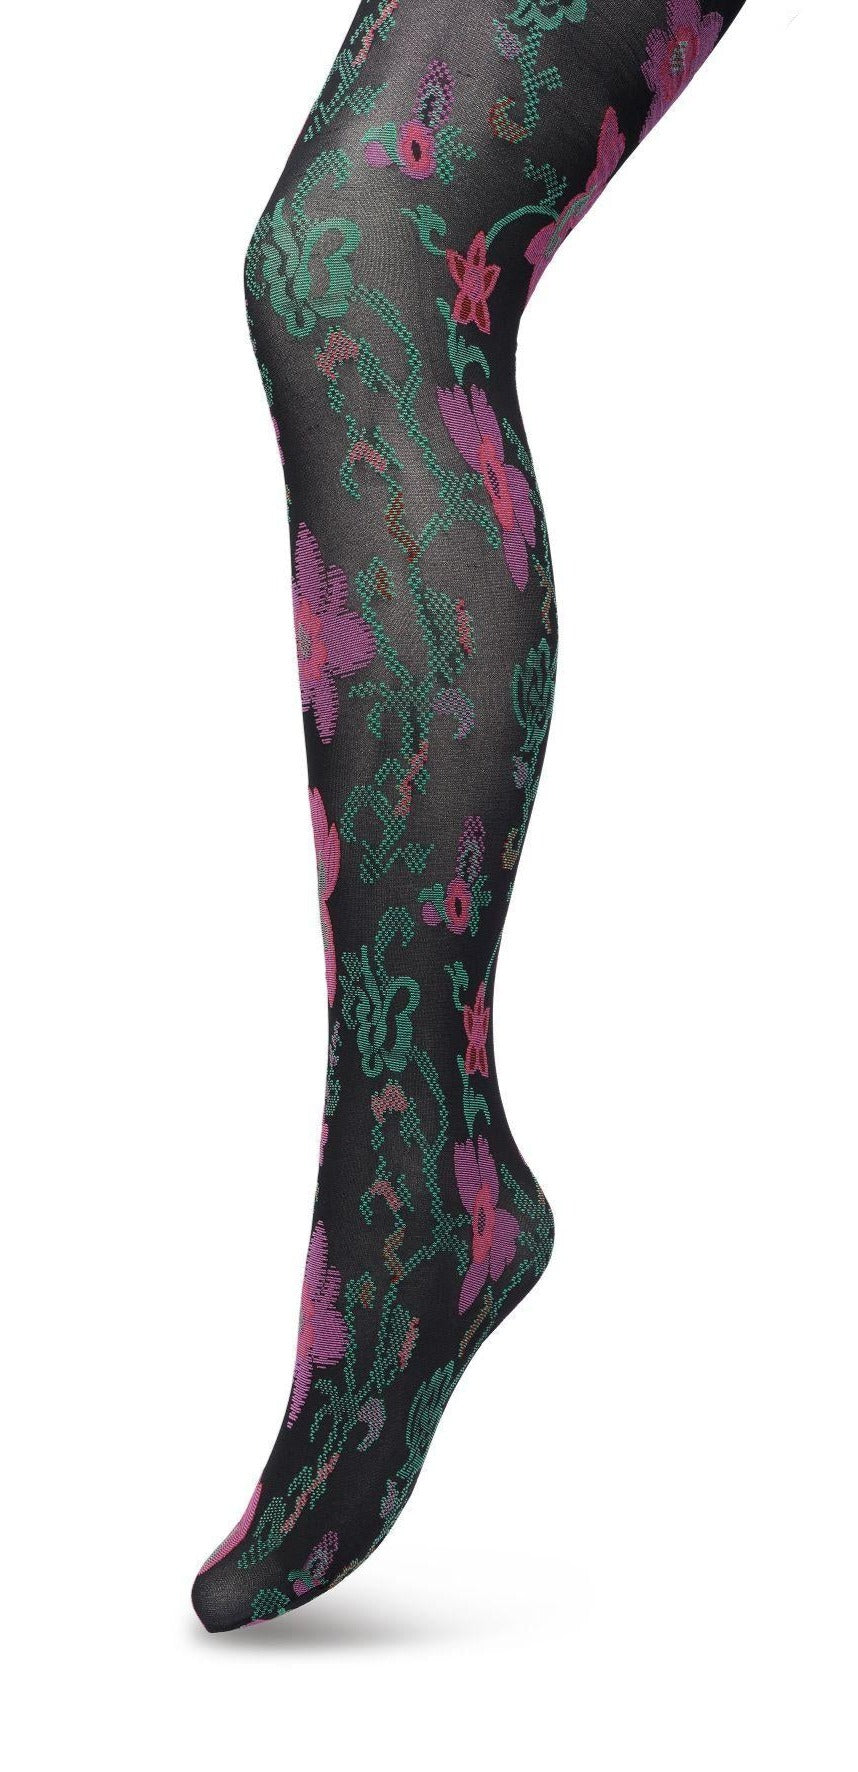 Bonnie Doon BP221905 Floral Ornament Tights - Black opaque fashion tights with a woven floral vine pattern in pink and green